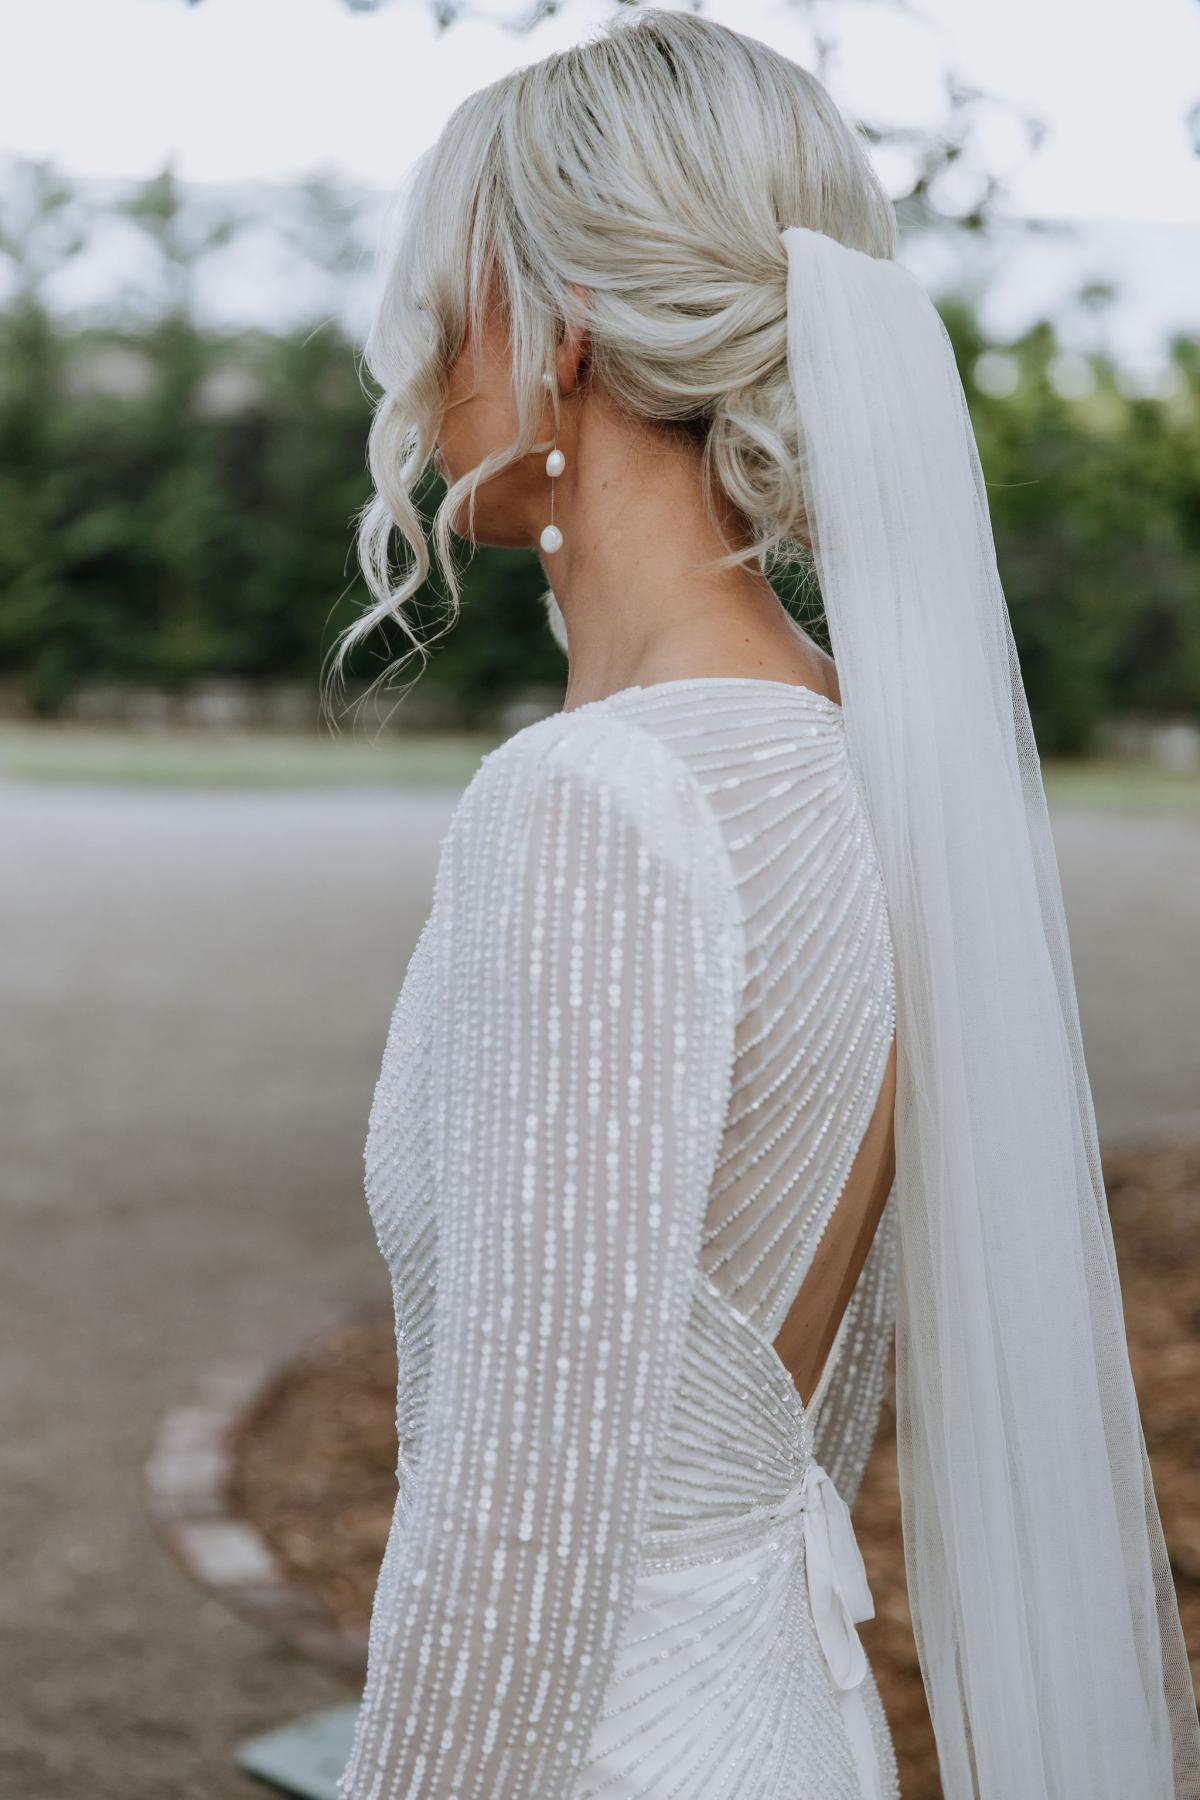 Perry - Karen Willis Homes - Laura & Ben - Bride is wearing a classic wedding dress, the Perry gown from the LUXE bridal collection, the perfect balance s sophisticated and elegant wedding dress.